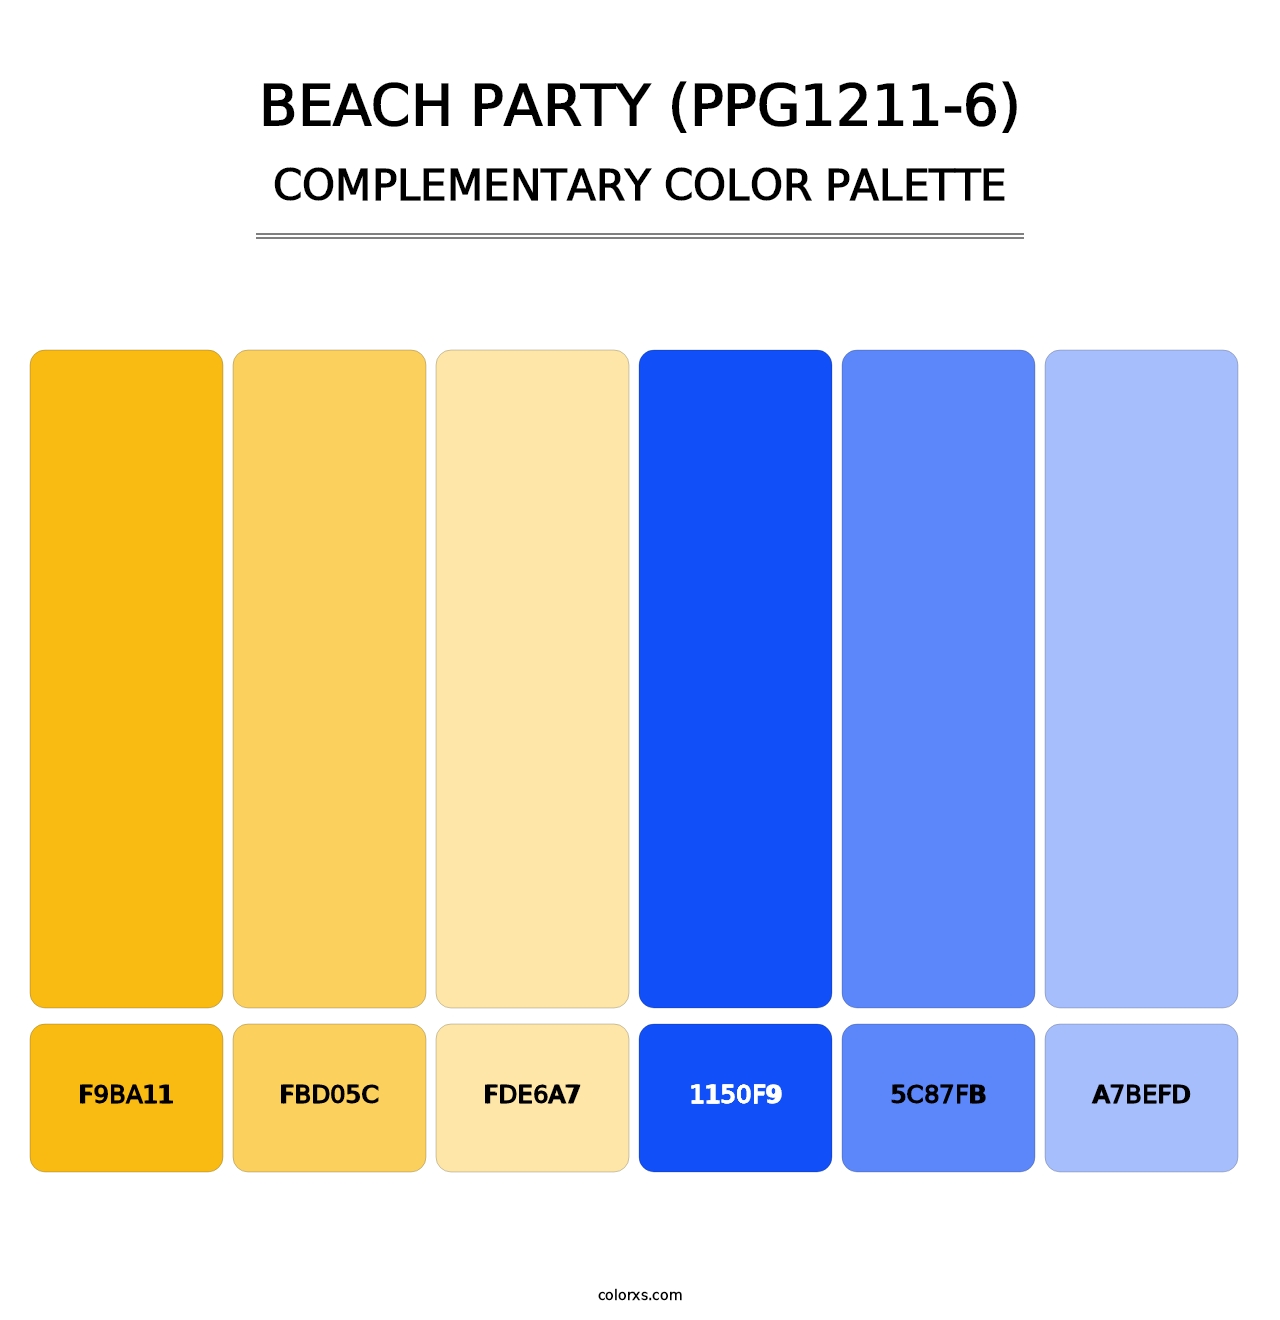 Beach Party (PPG1211-6) - Complementary Color Palette